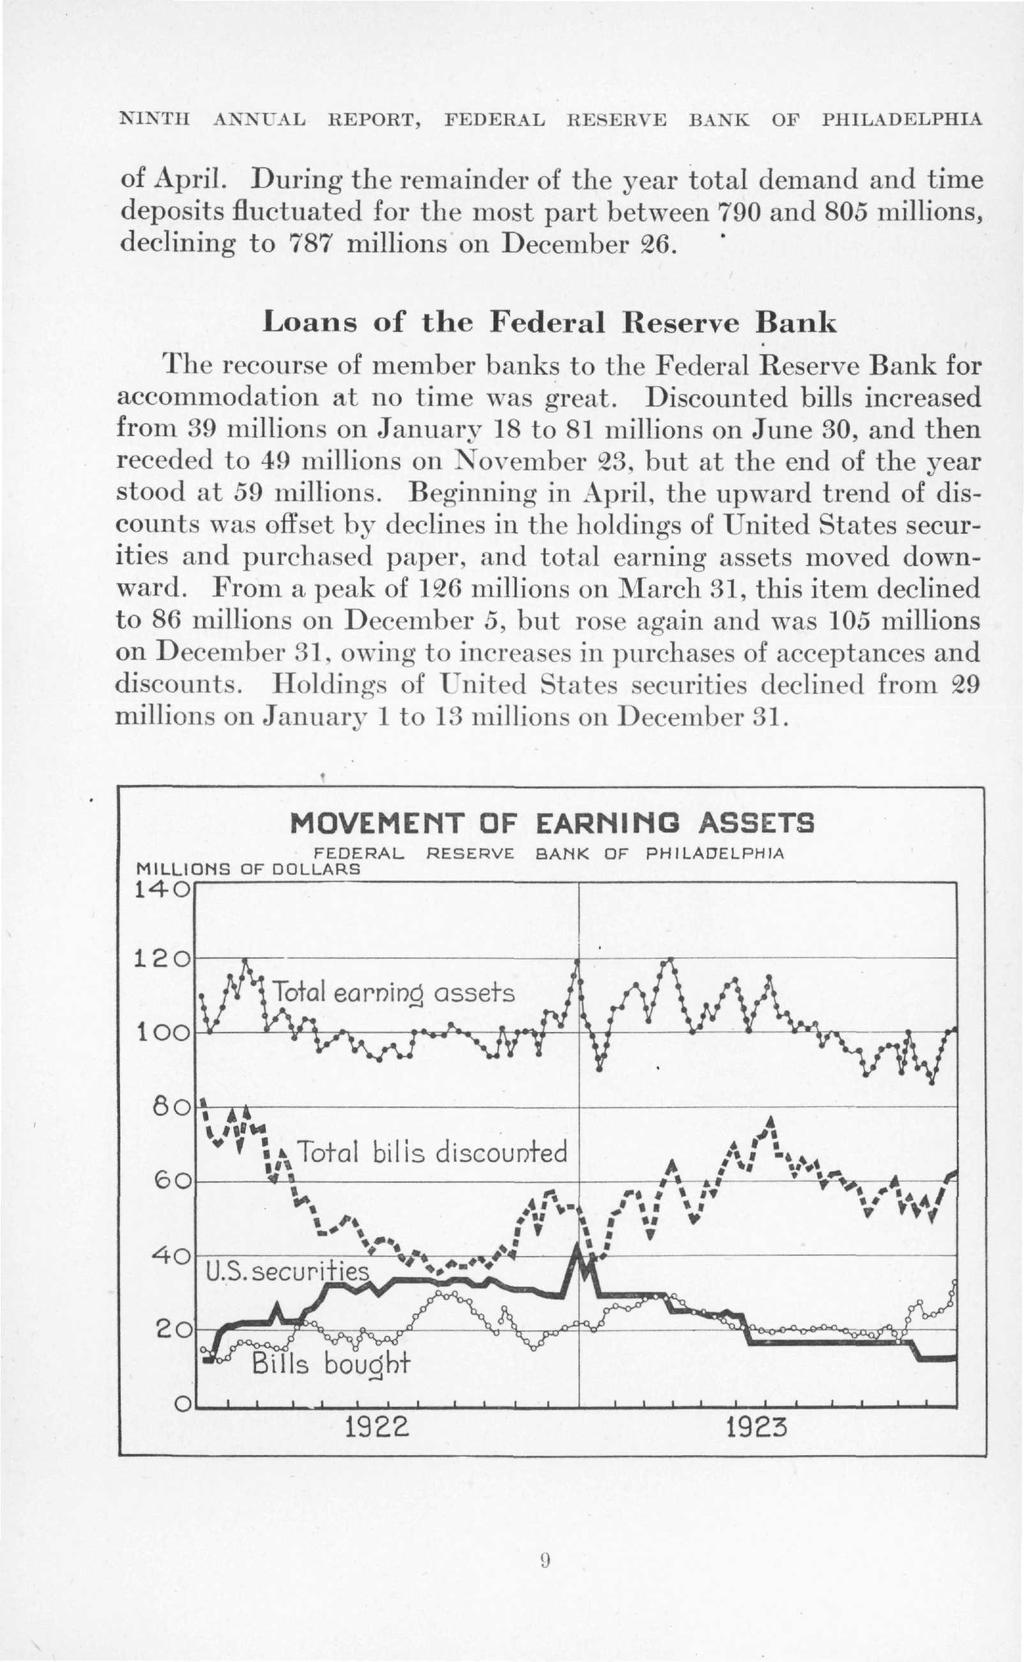 NINTH ANNUAL REPORT, FEDERAL RESERVE BANK OF PHILADELPHIA of April.